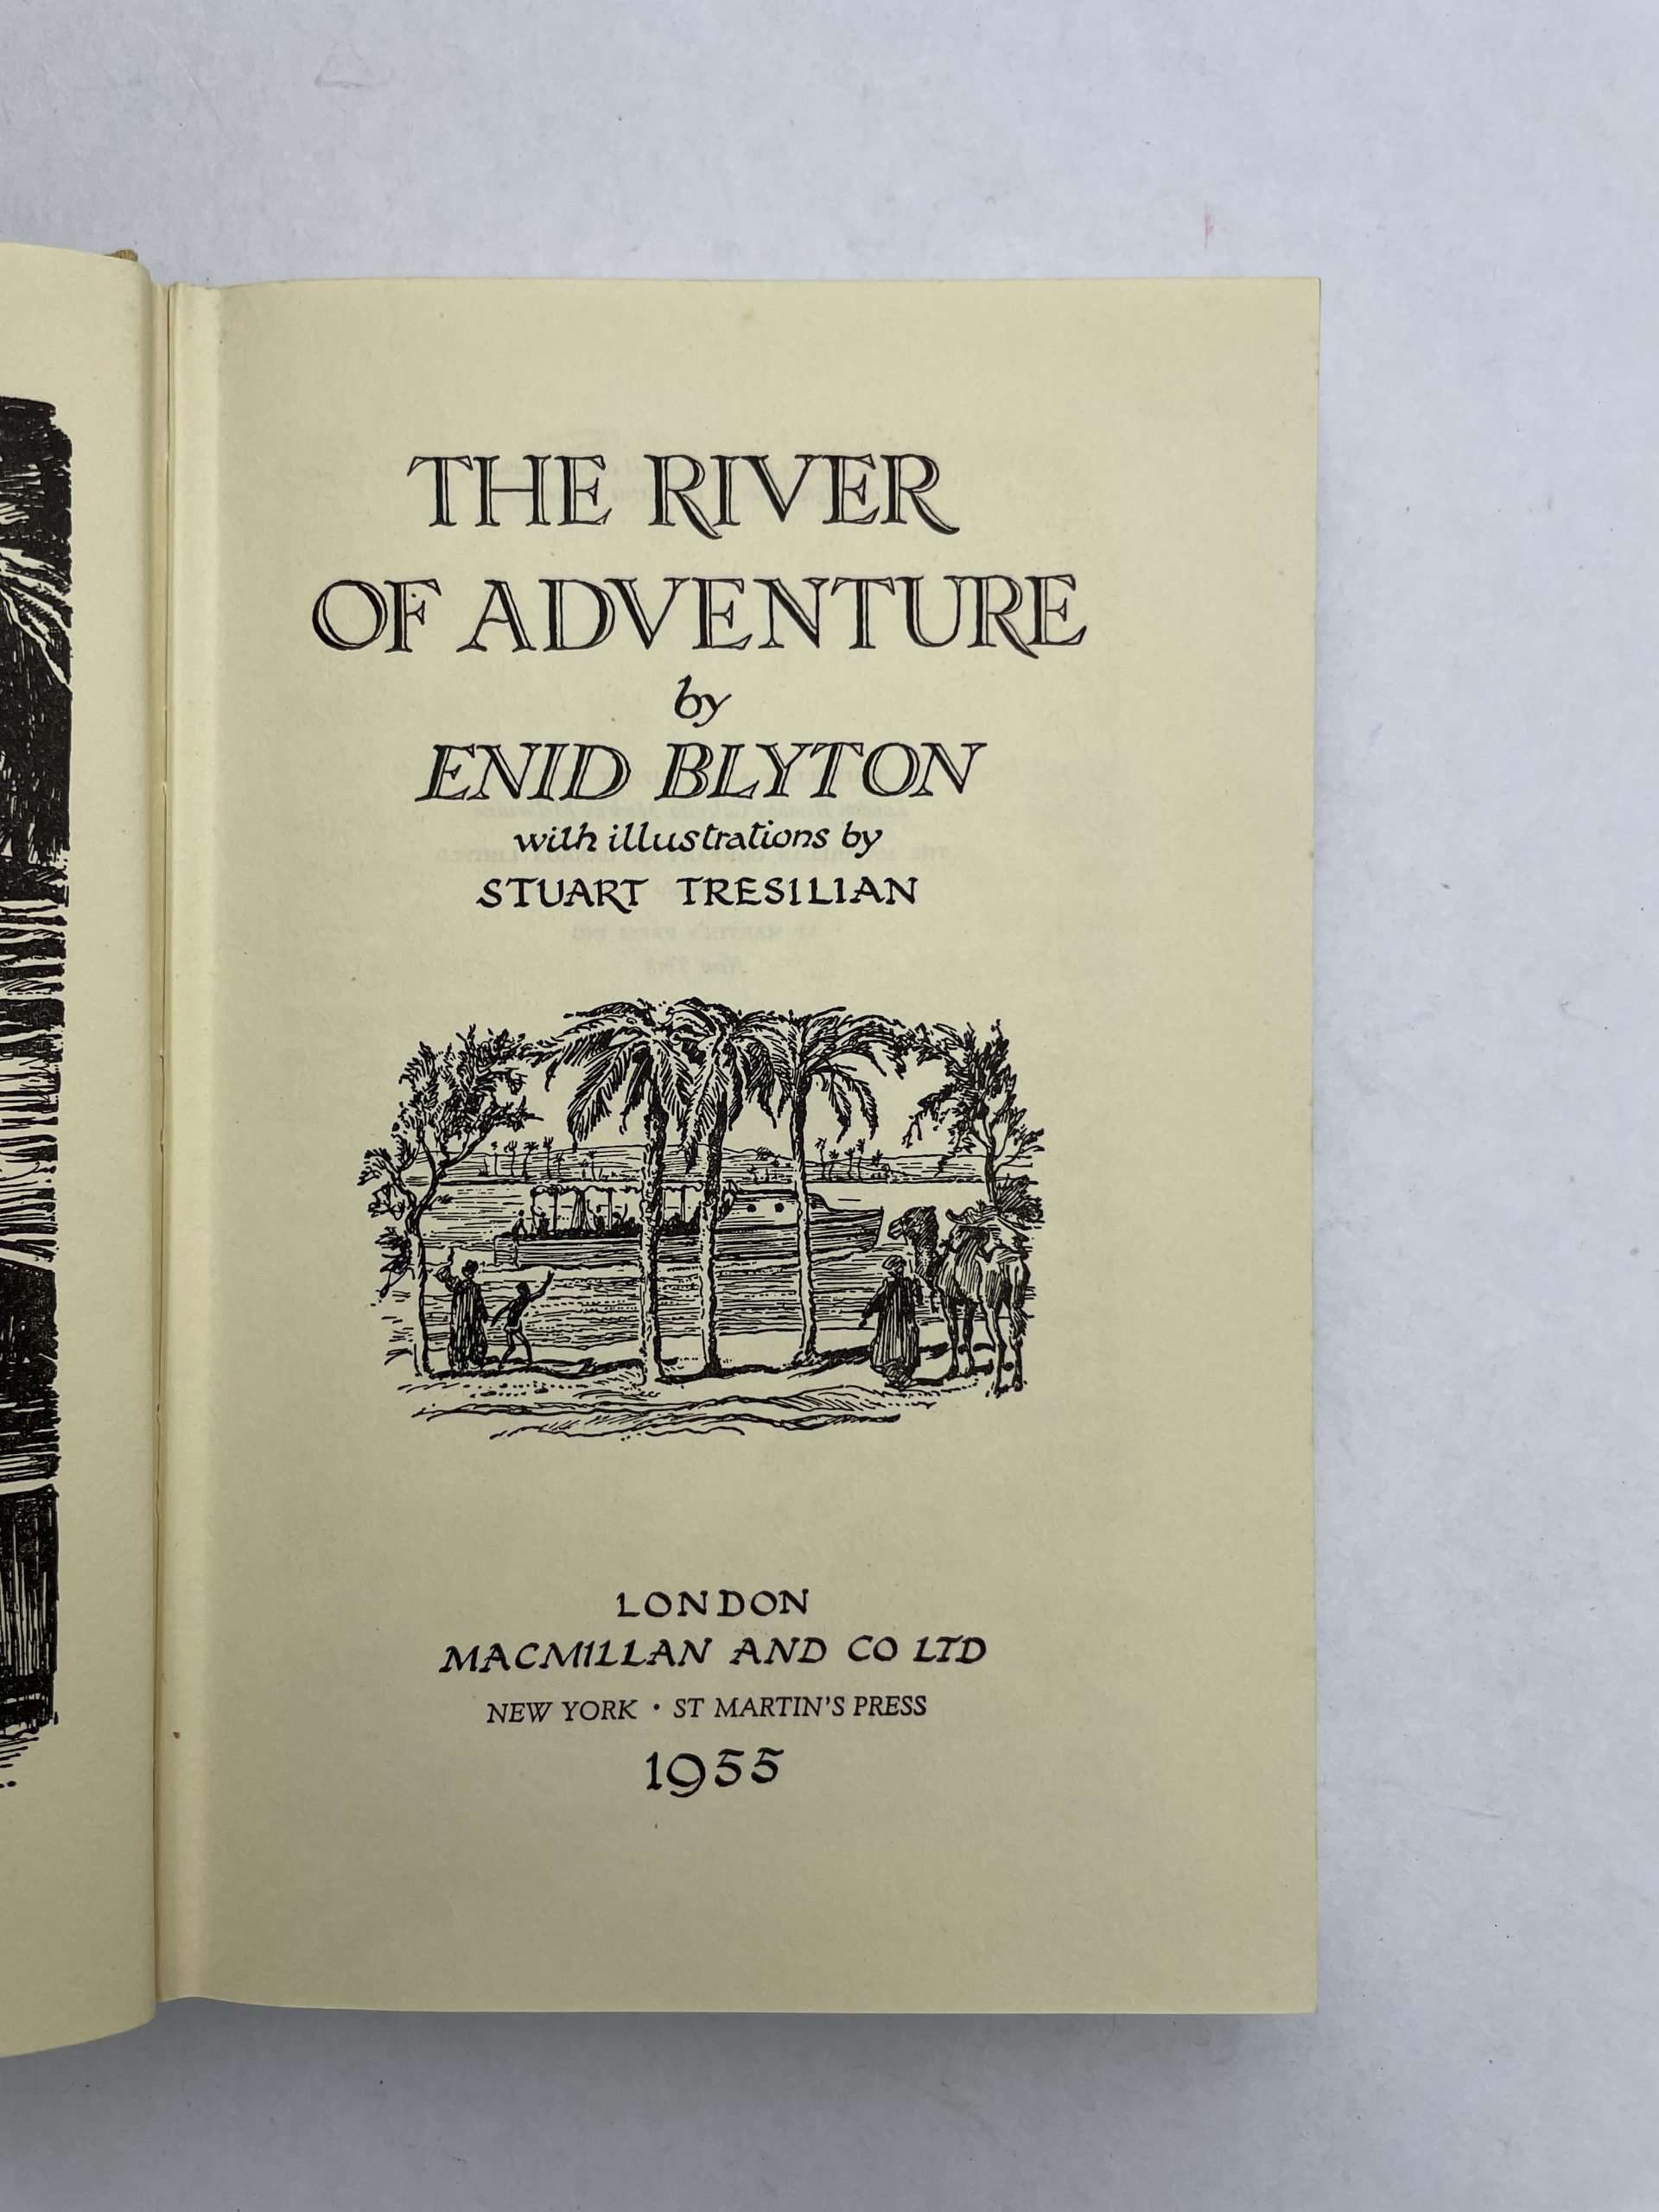 enid blyton the river of adventure first ed2